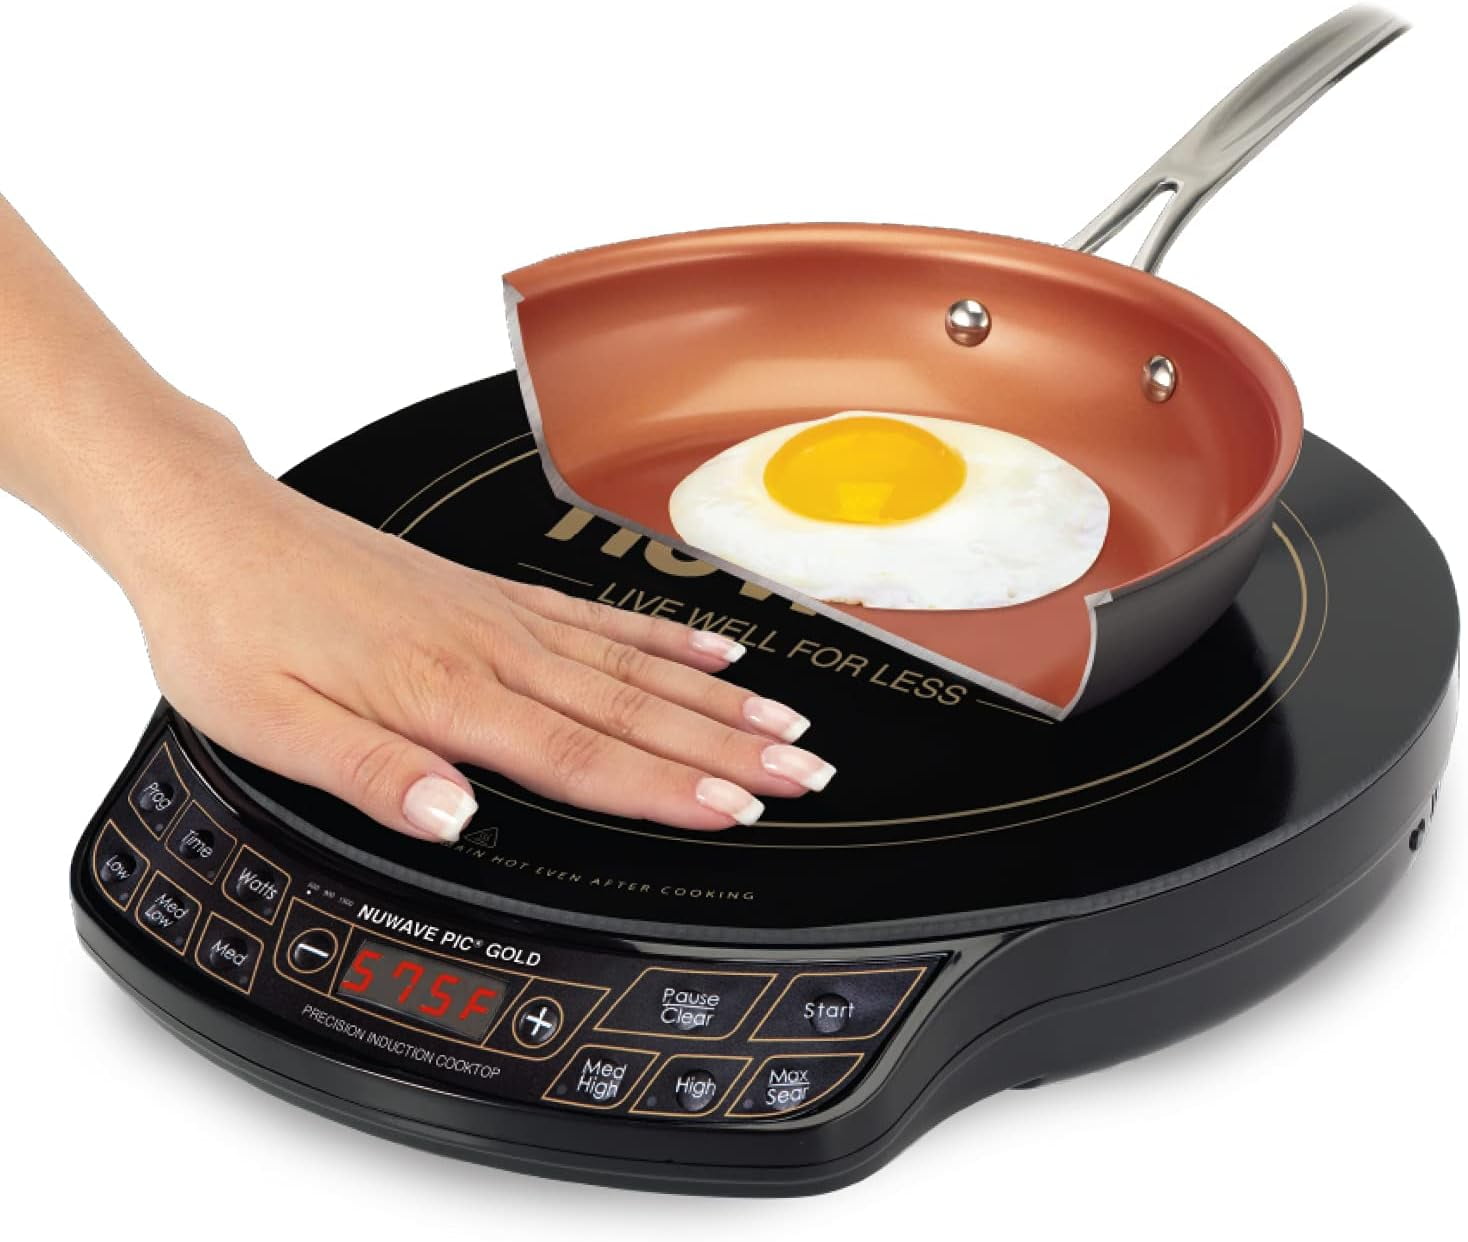 NuWave Precision Induction Cooktop 1300 Watts - Learn how to Feed